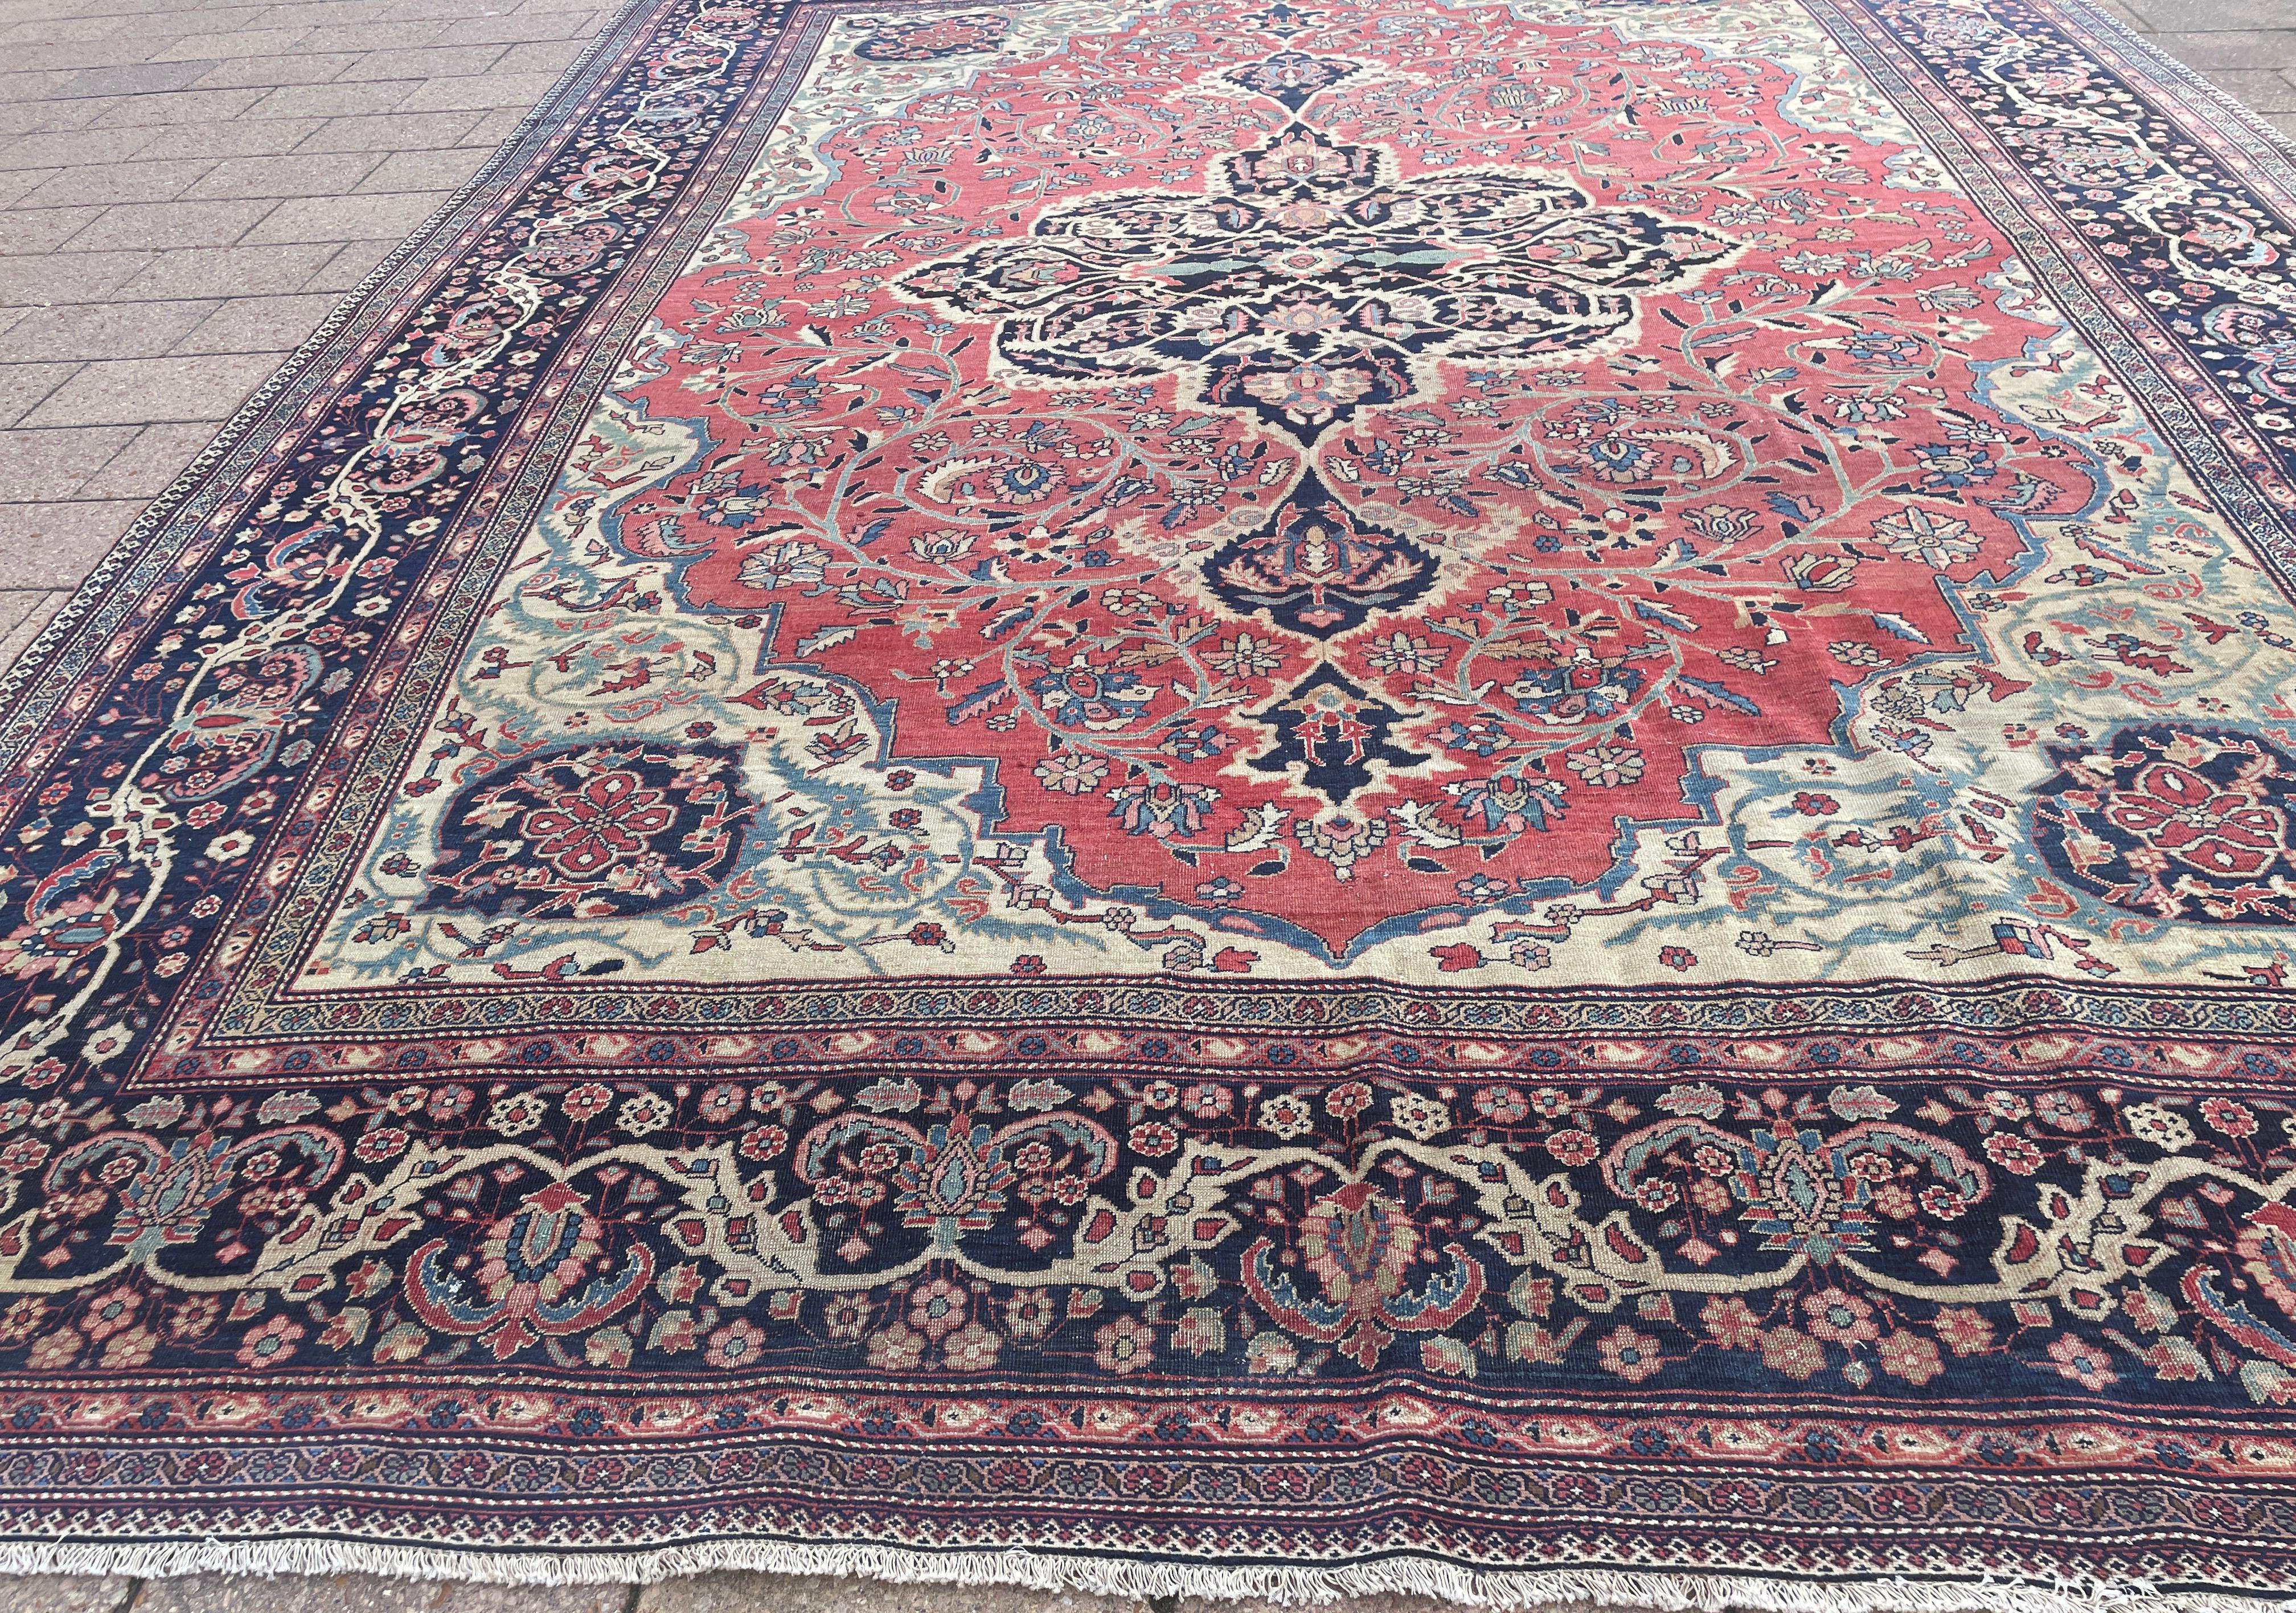 Hand-Woven Antique Persian Feraghan Sarouk Carpet, Most Beautiful For Sale